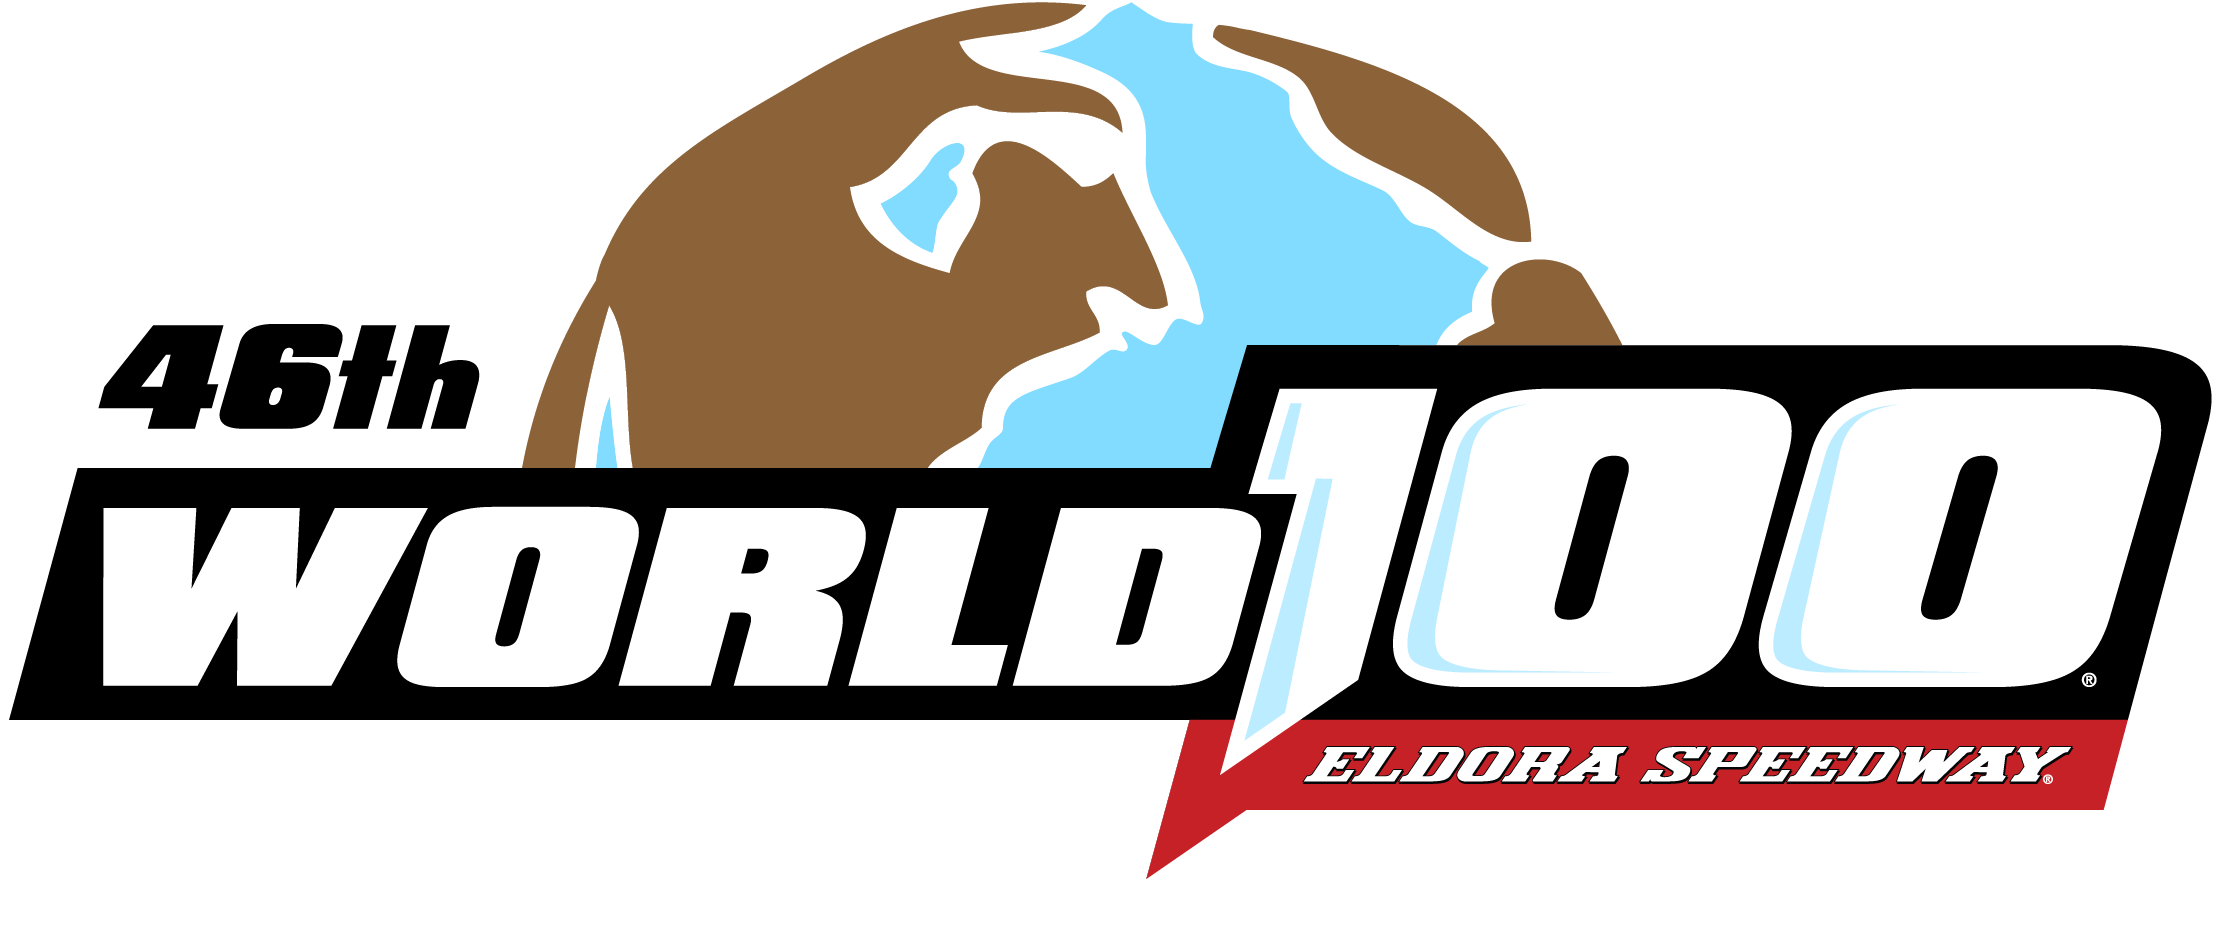 Eldora announces tire for. Rules clipart rule the world